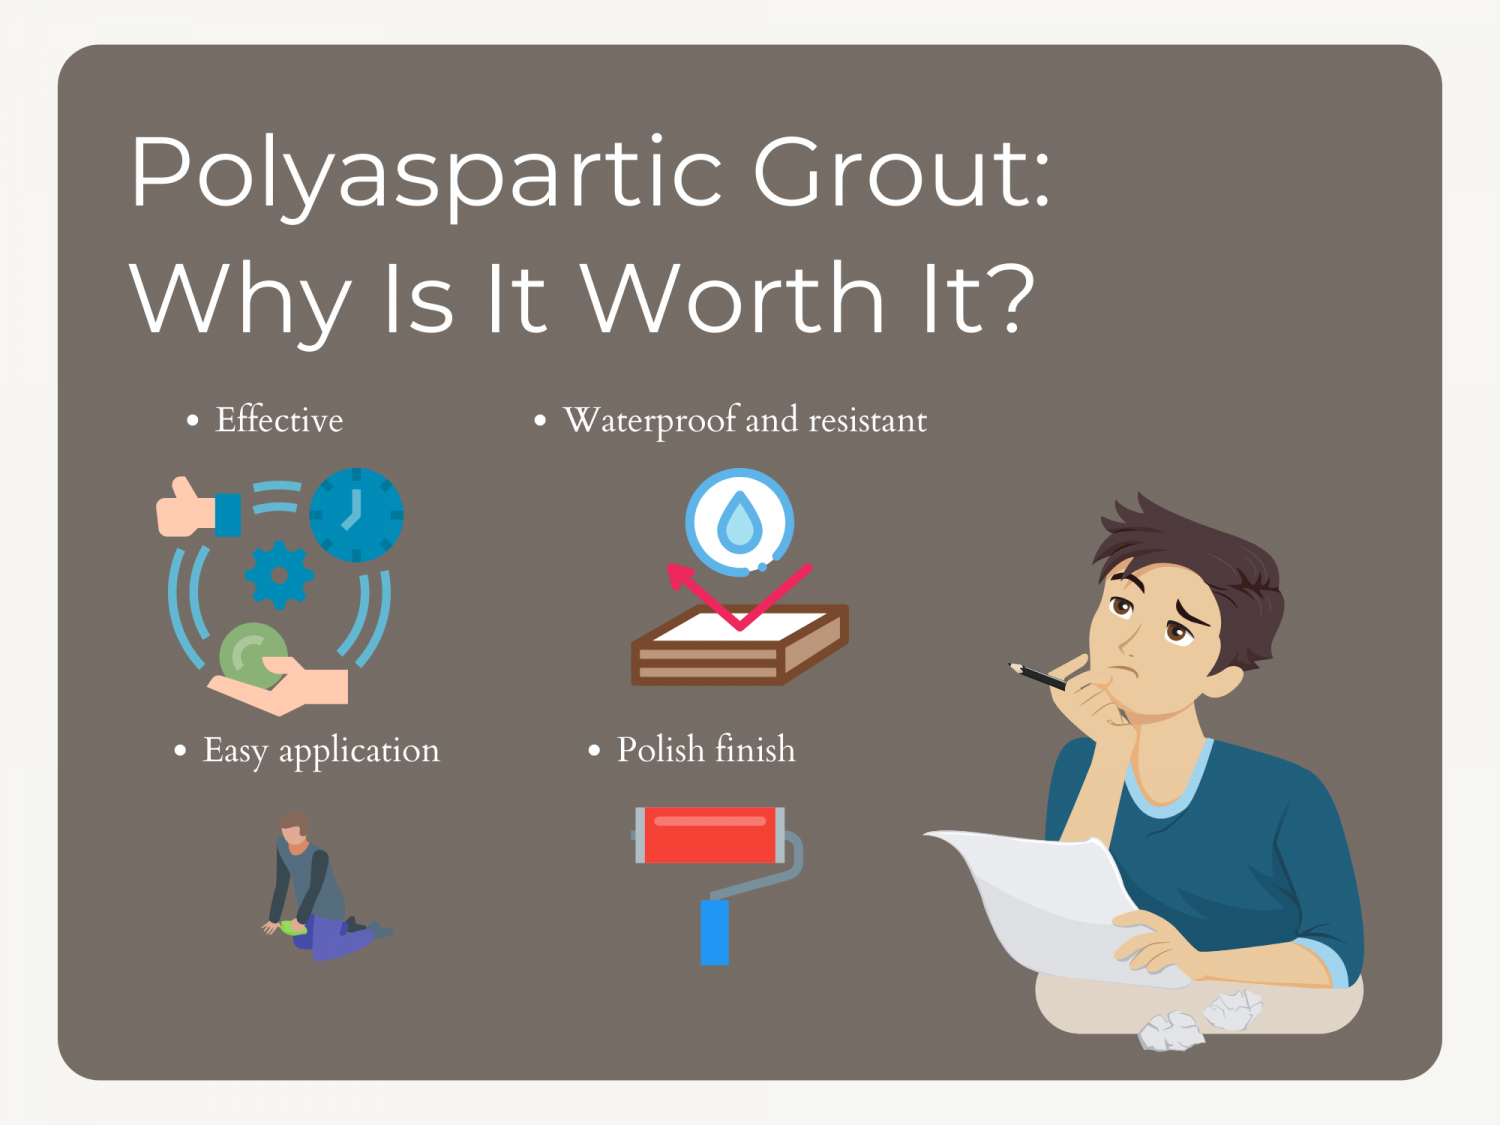 Polyaspartic Grout: Why Is It Worth It? Infographic